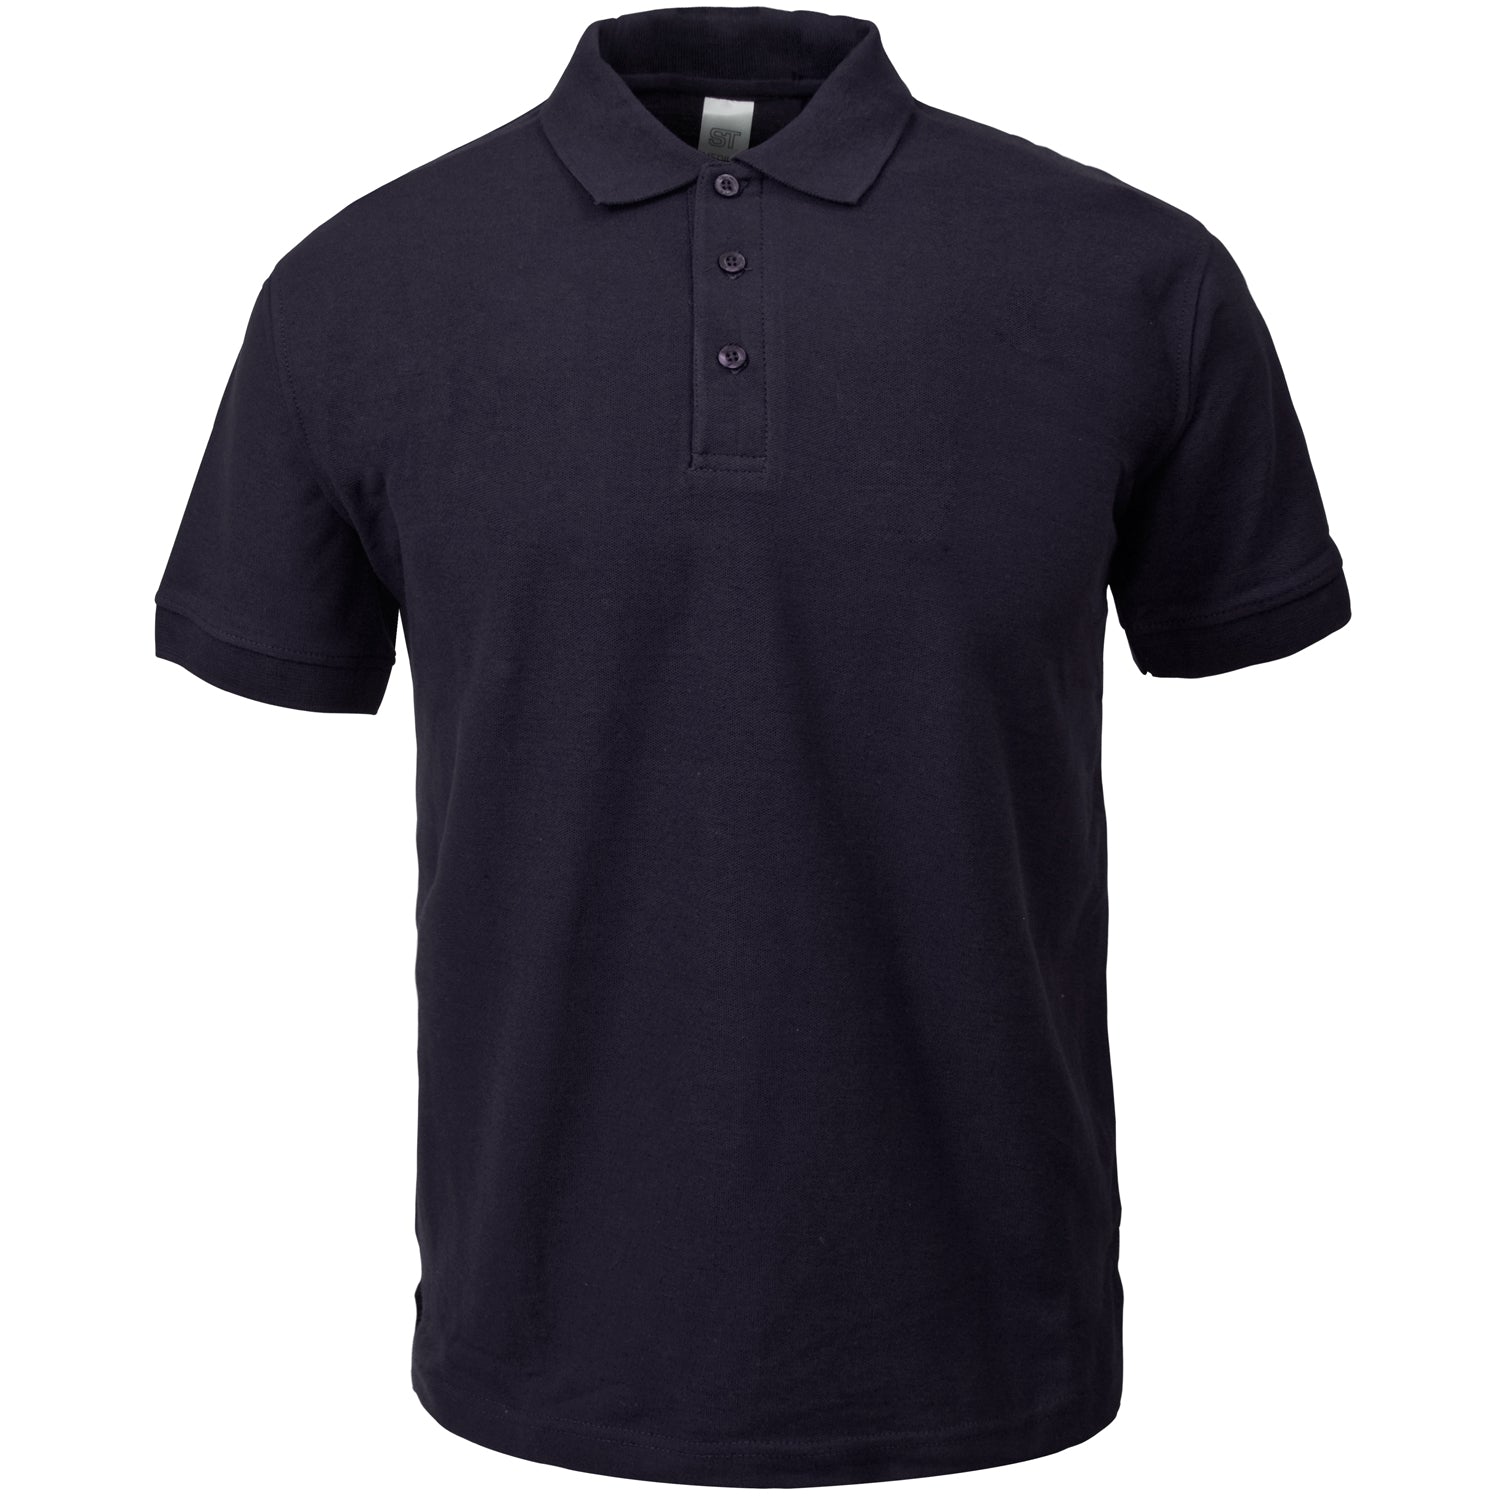 Supertouch Polo Shirt - Classic